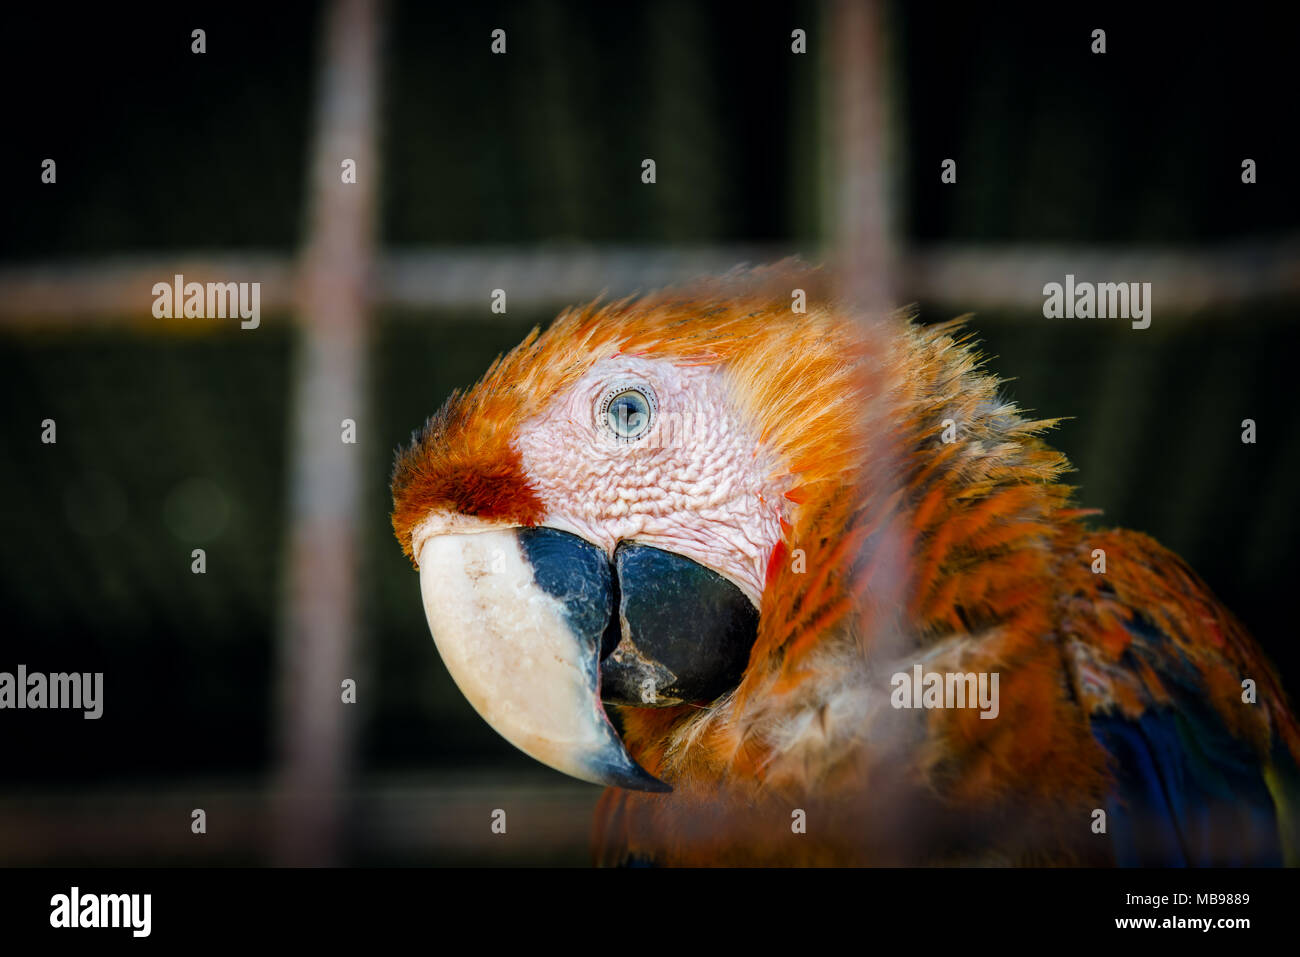 Scarlet macaw making eye contact from inside his cage in captivity close up portrait curious look Stock Photo